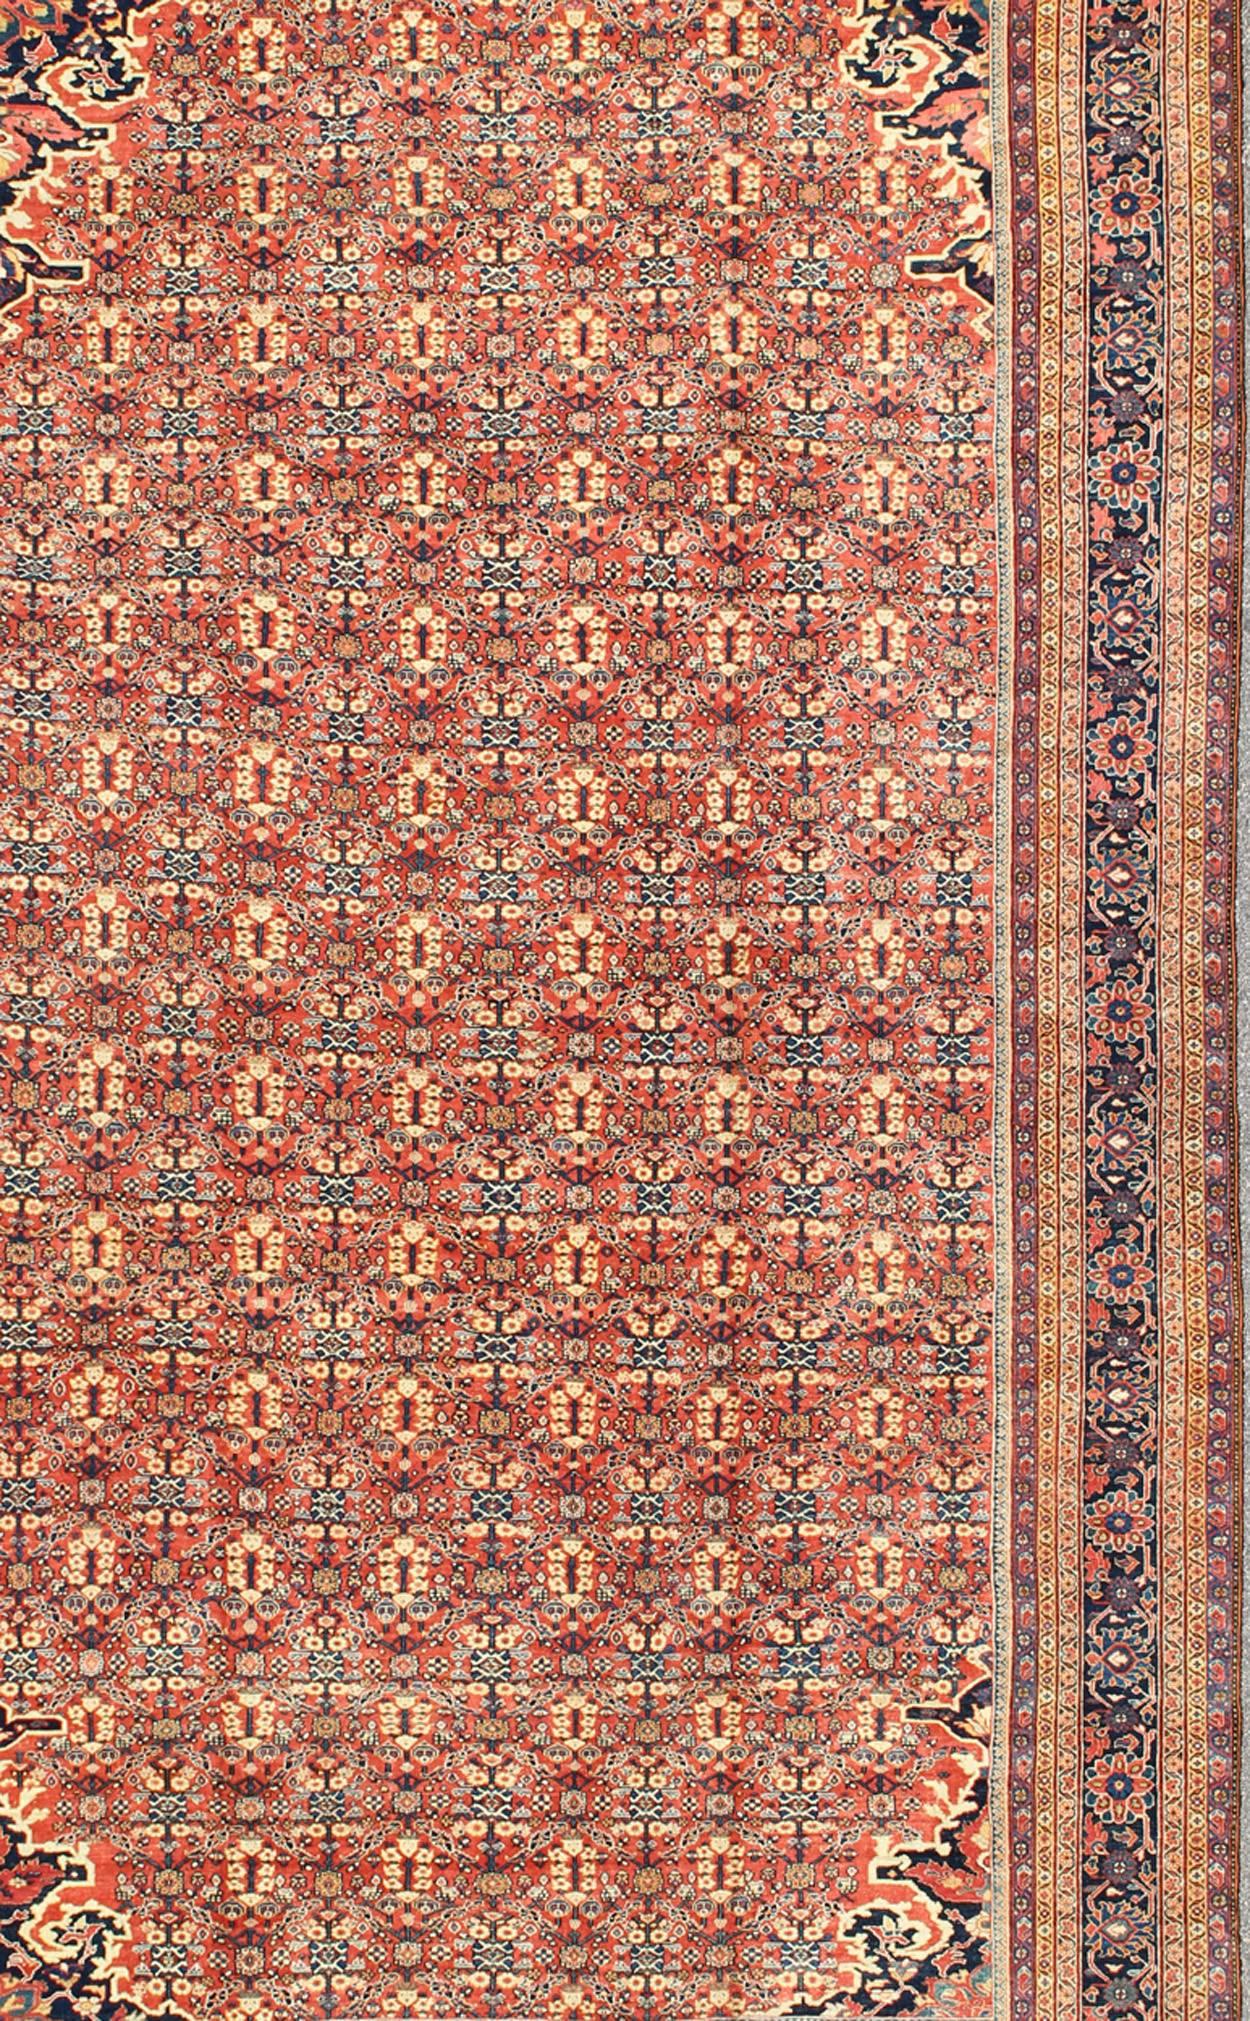 20th Century Antique Persian Sultanabad Rug with All Over Design in Rust Red, Blue and Cream